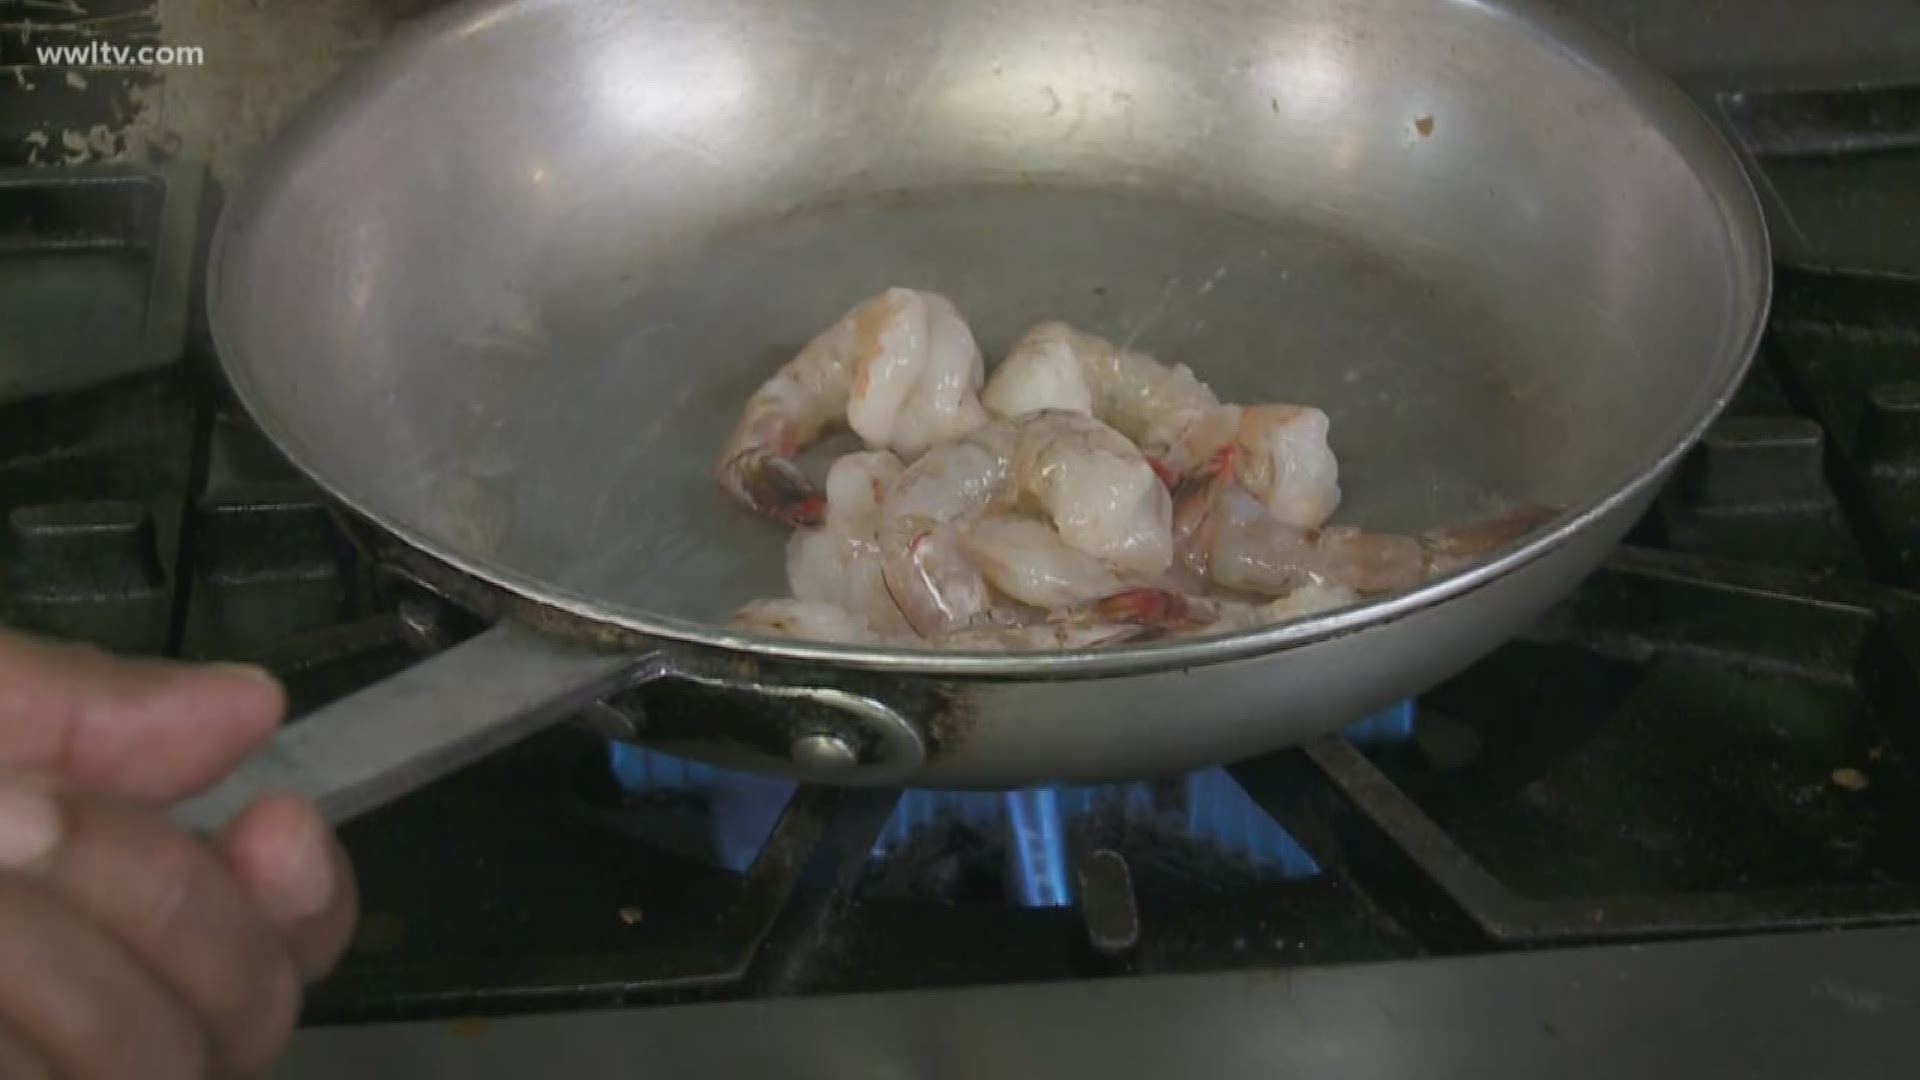 The law went into effect on September 1 and requires that restaurants in the state let customers know if their seafood is imported.